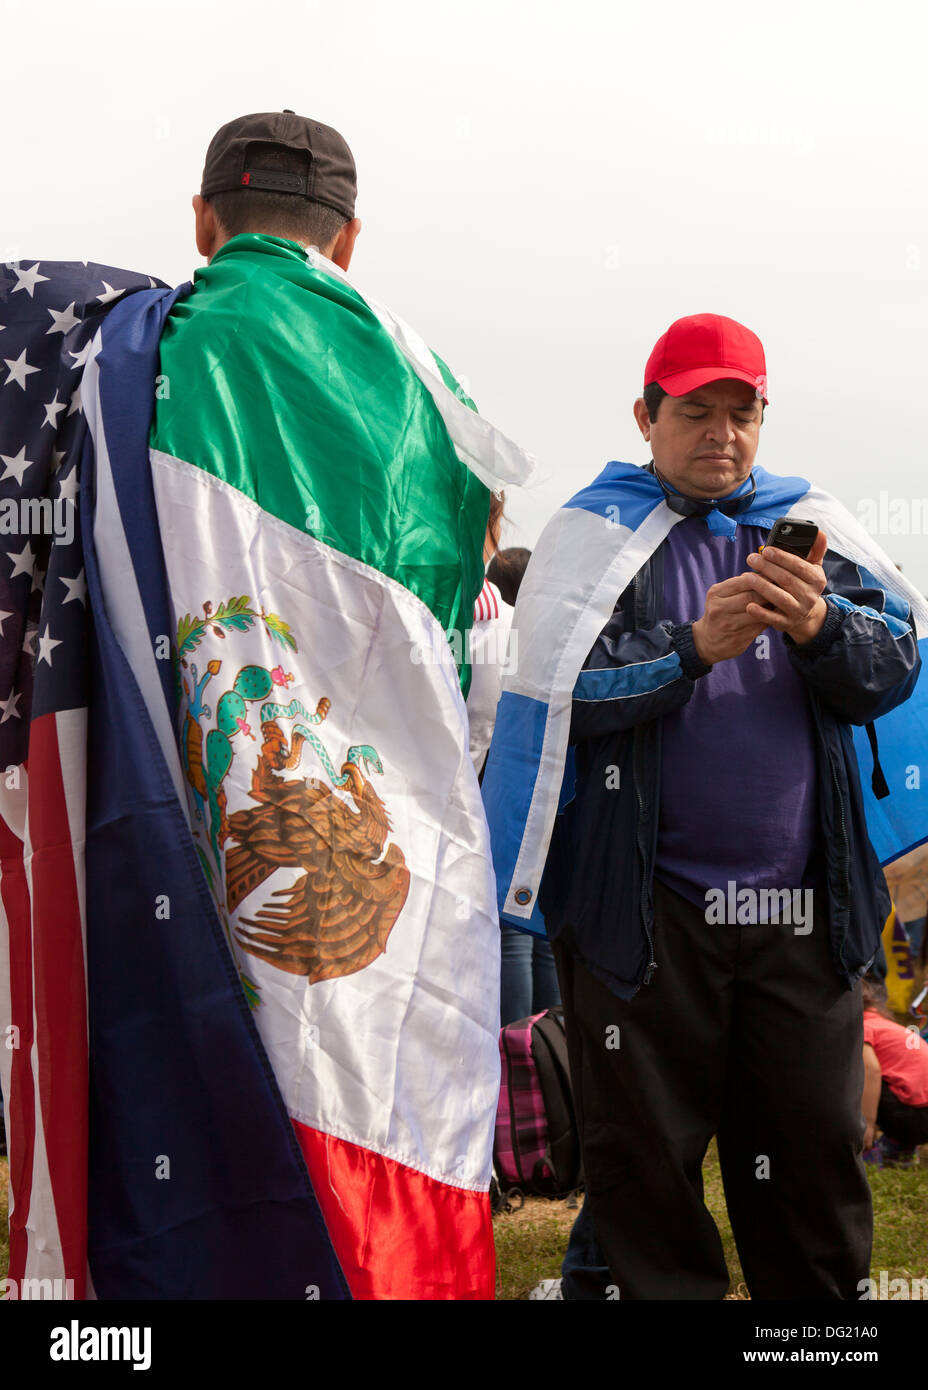 Man wearing a Mexican and American flag at Immigration Reform rally - Washington, DC USA Stock Photo